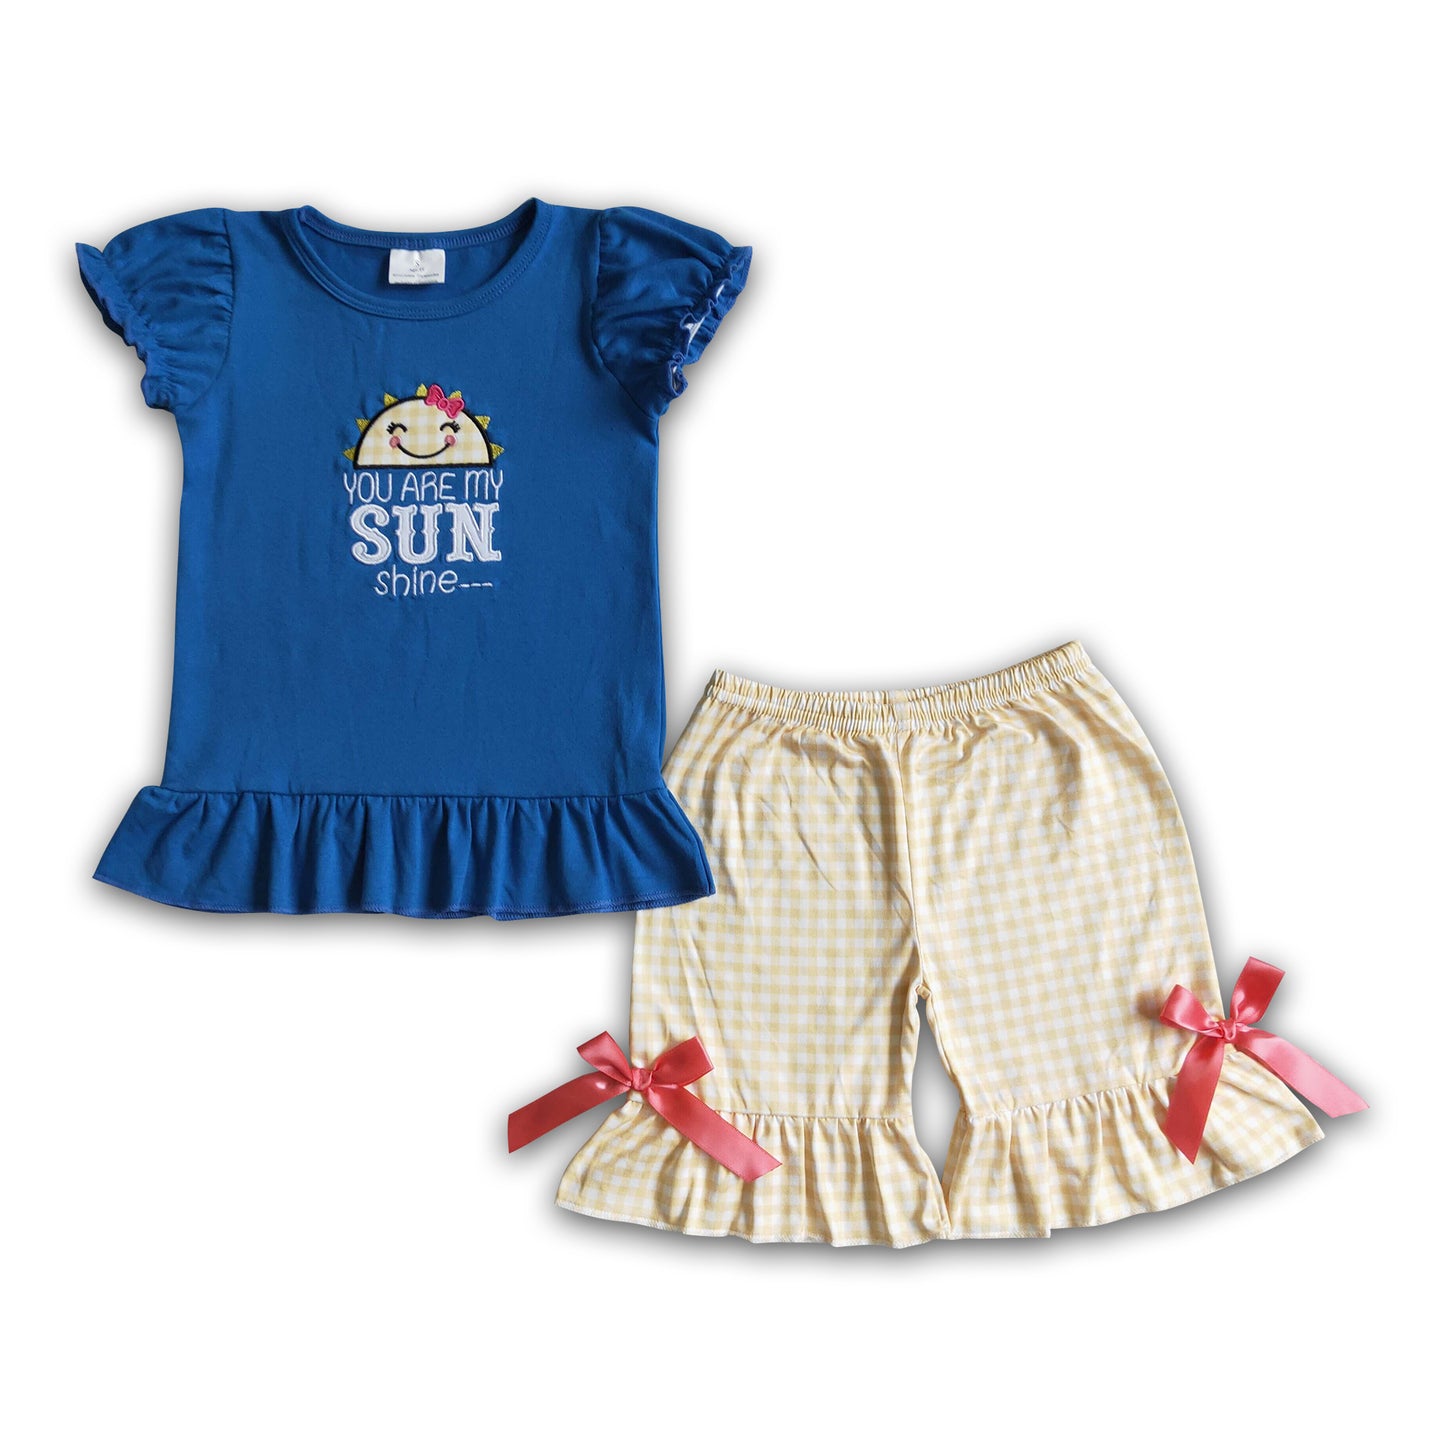 You are my sunshine embroidery girls summer outfits